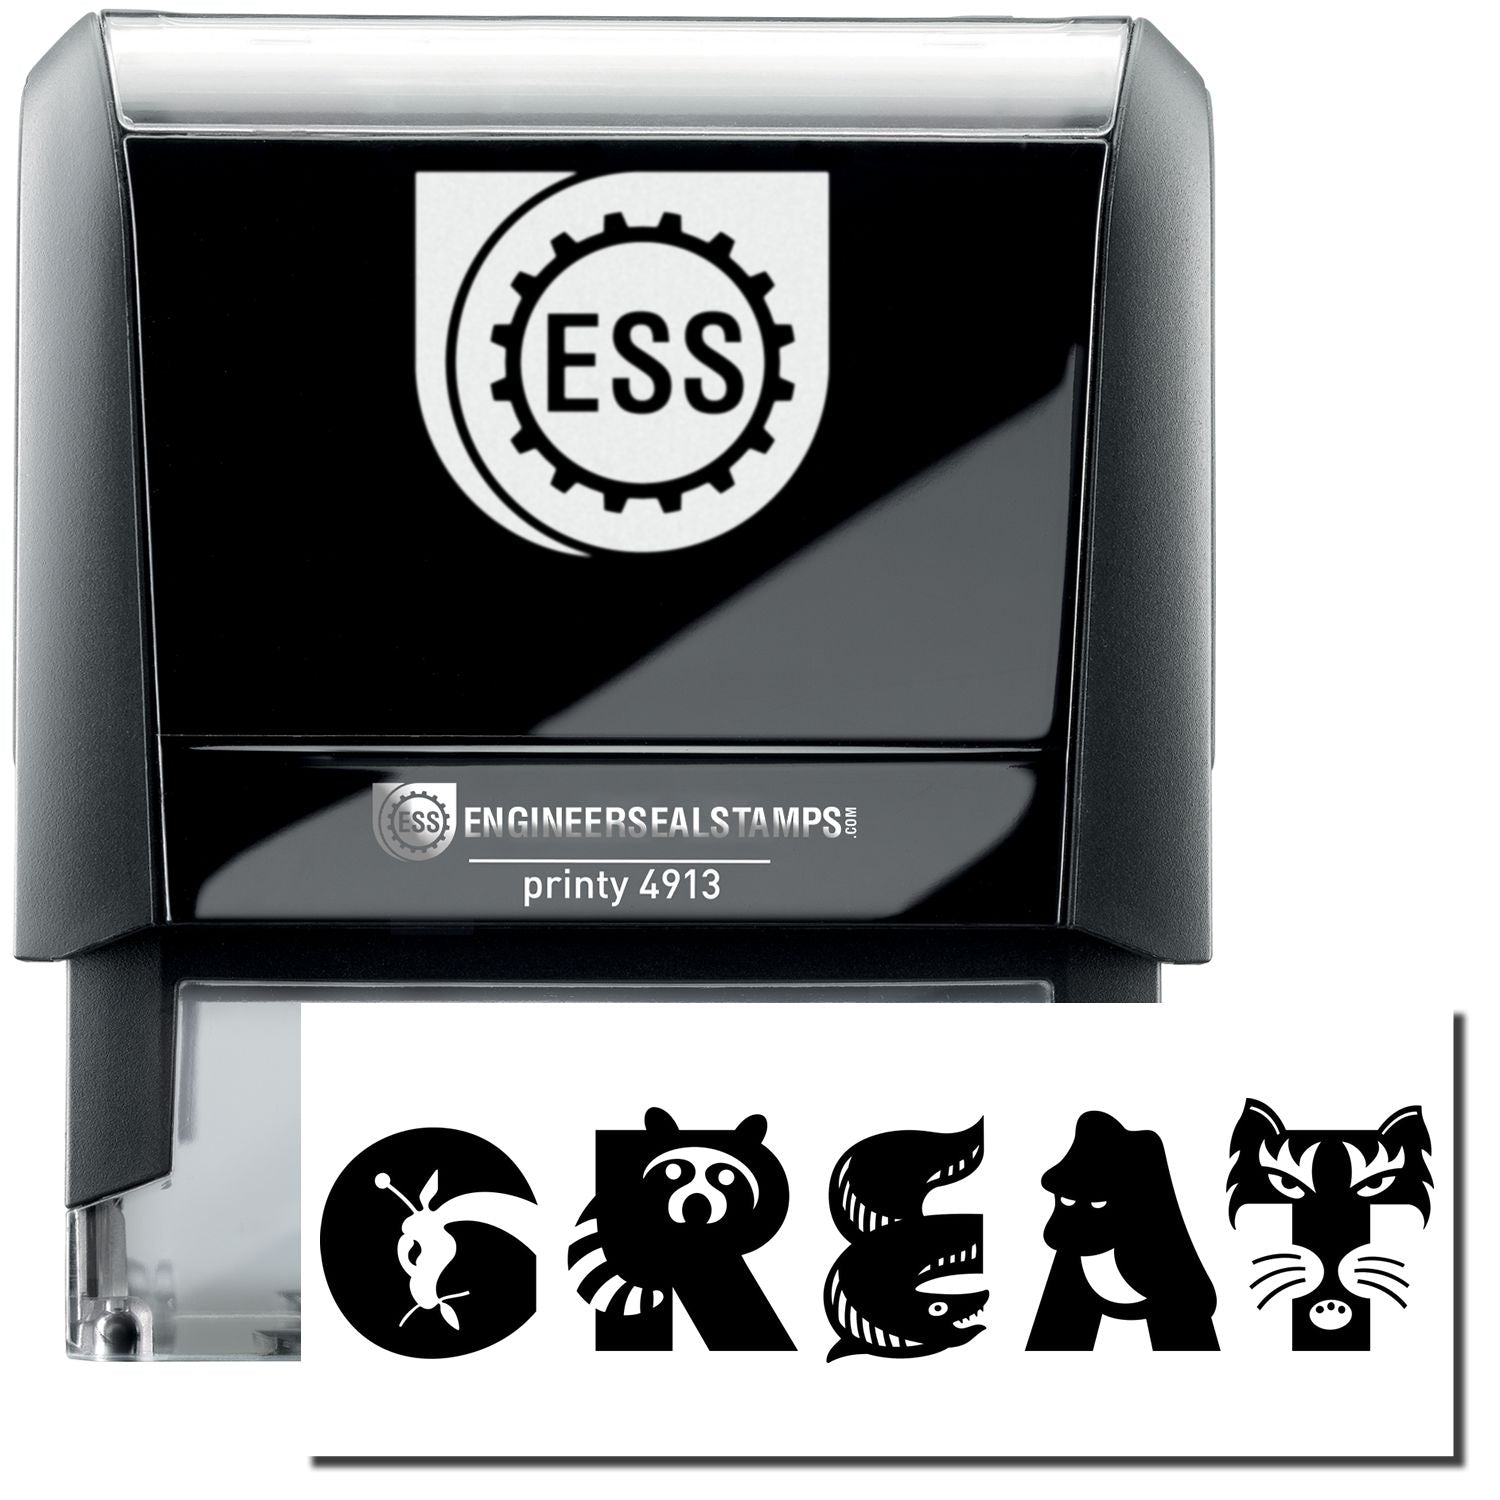 A self-inking stamp with a stamped image showing how the text "GREAT" in a large unique bold font is displayed after stamping. Each of the letters in the word "GREAT" is resembling an animal, including a giraffe, raccoon, eel, ape, and tiger.